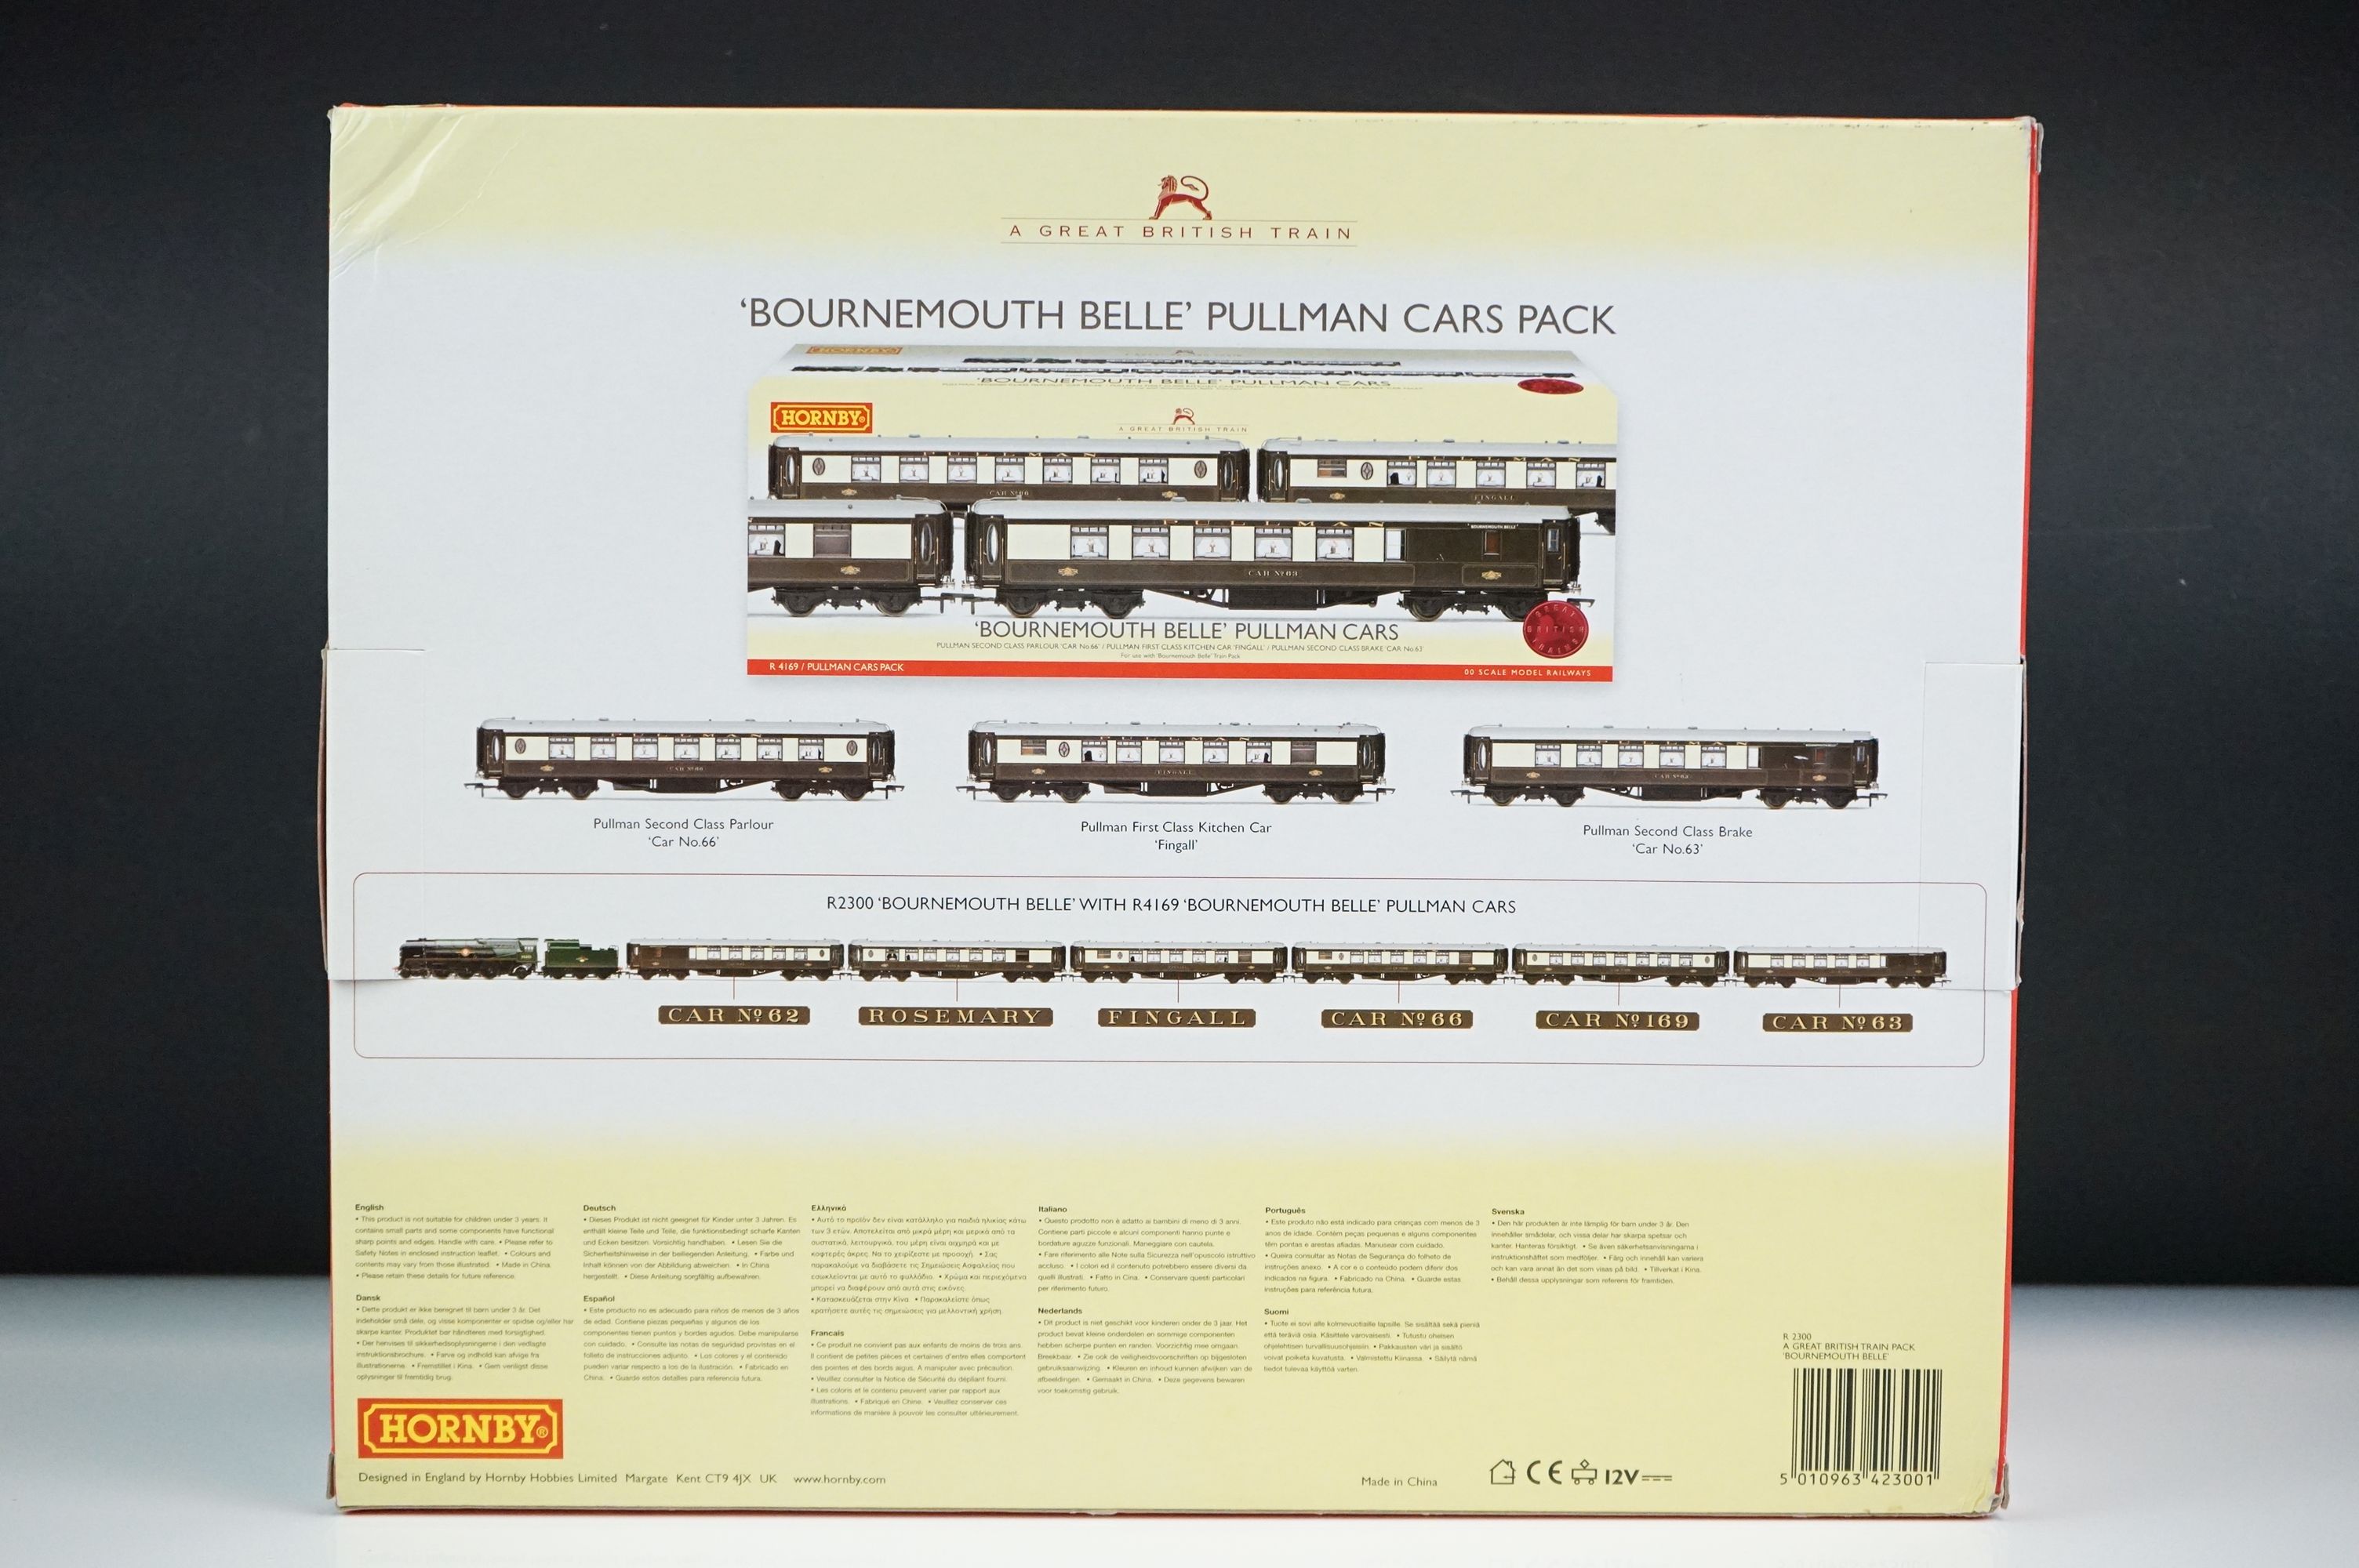 Boxed Hornby OO gauge R2300 Bournemouth Belle Train Pack complete with Merchant Class locomotive, - Image 5 of 5